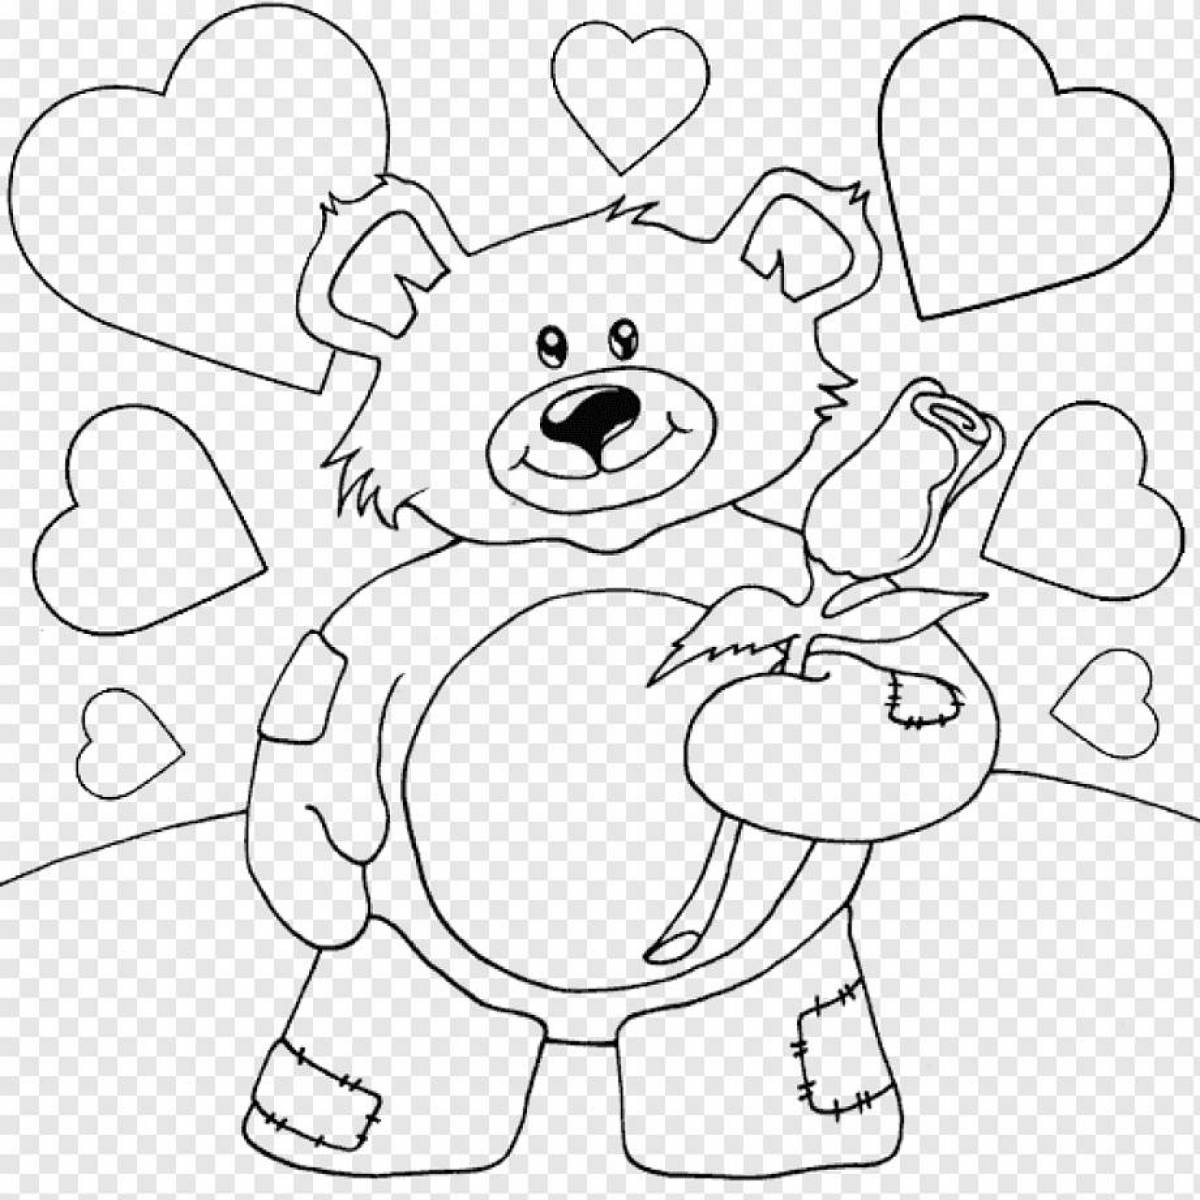 Live teddy bear with heart coloring book